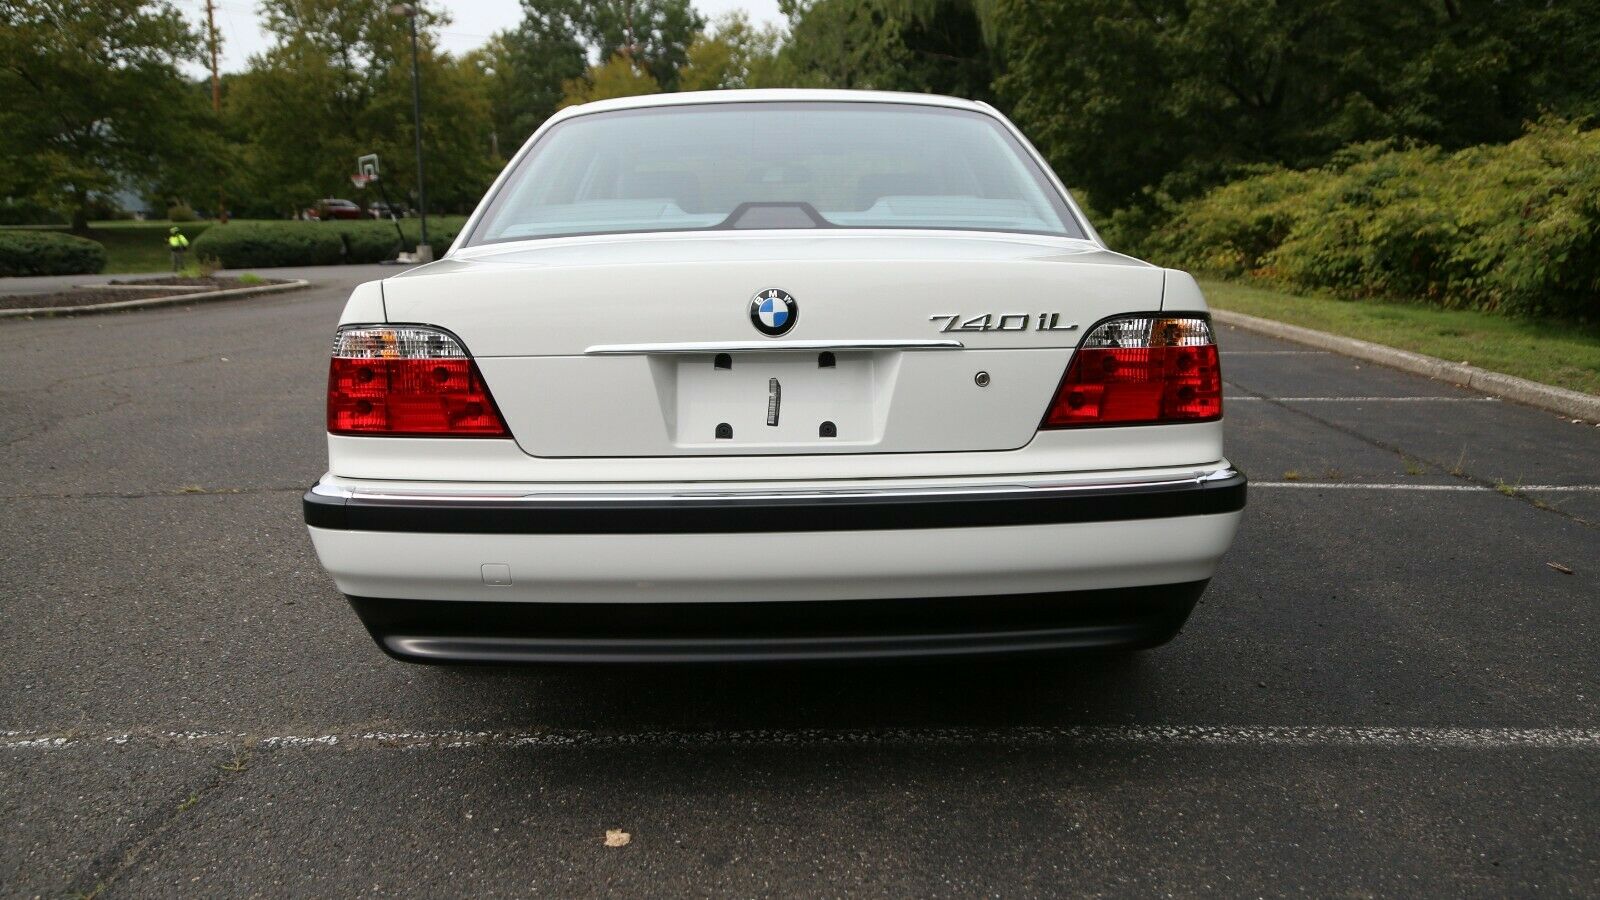 Pristine 13k Mile 2000 BMW 740iL Wants A New Home But No One Is Willing To  Pay The Price | Carscoops